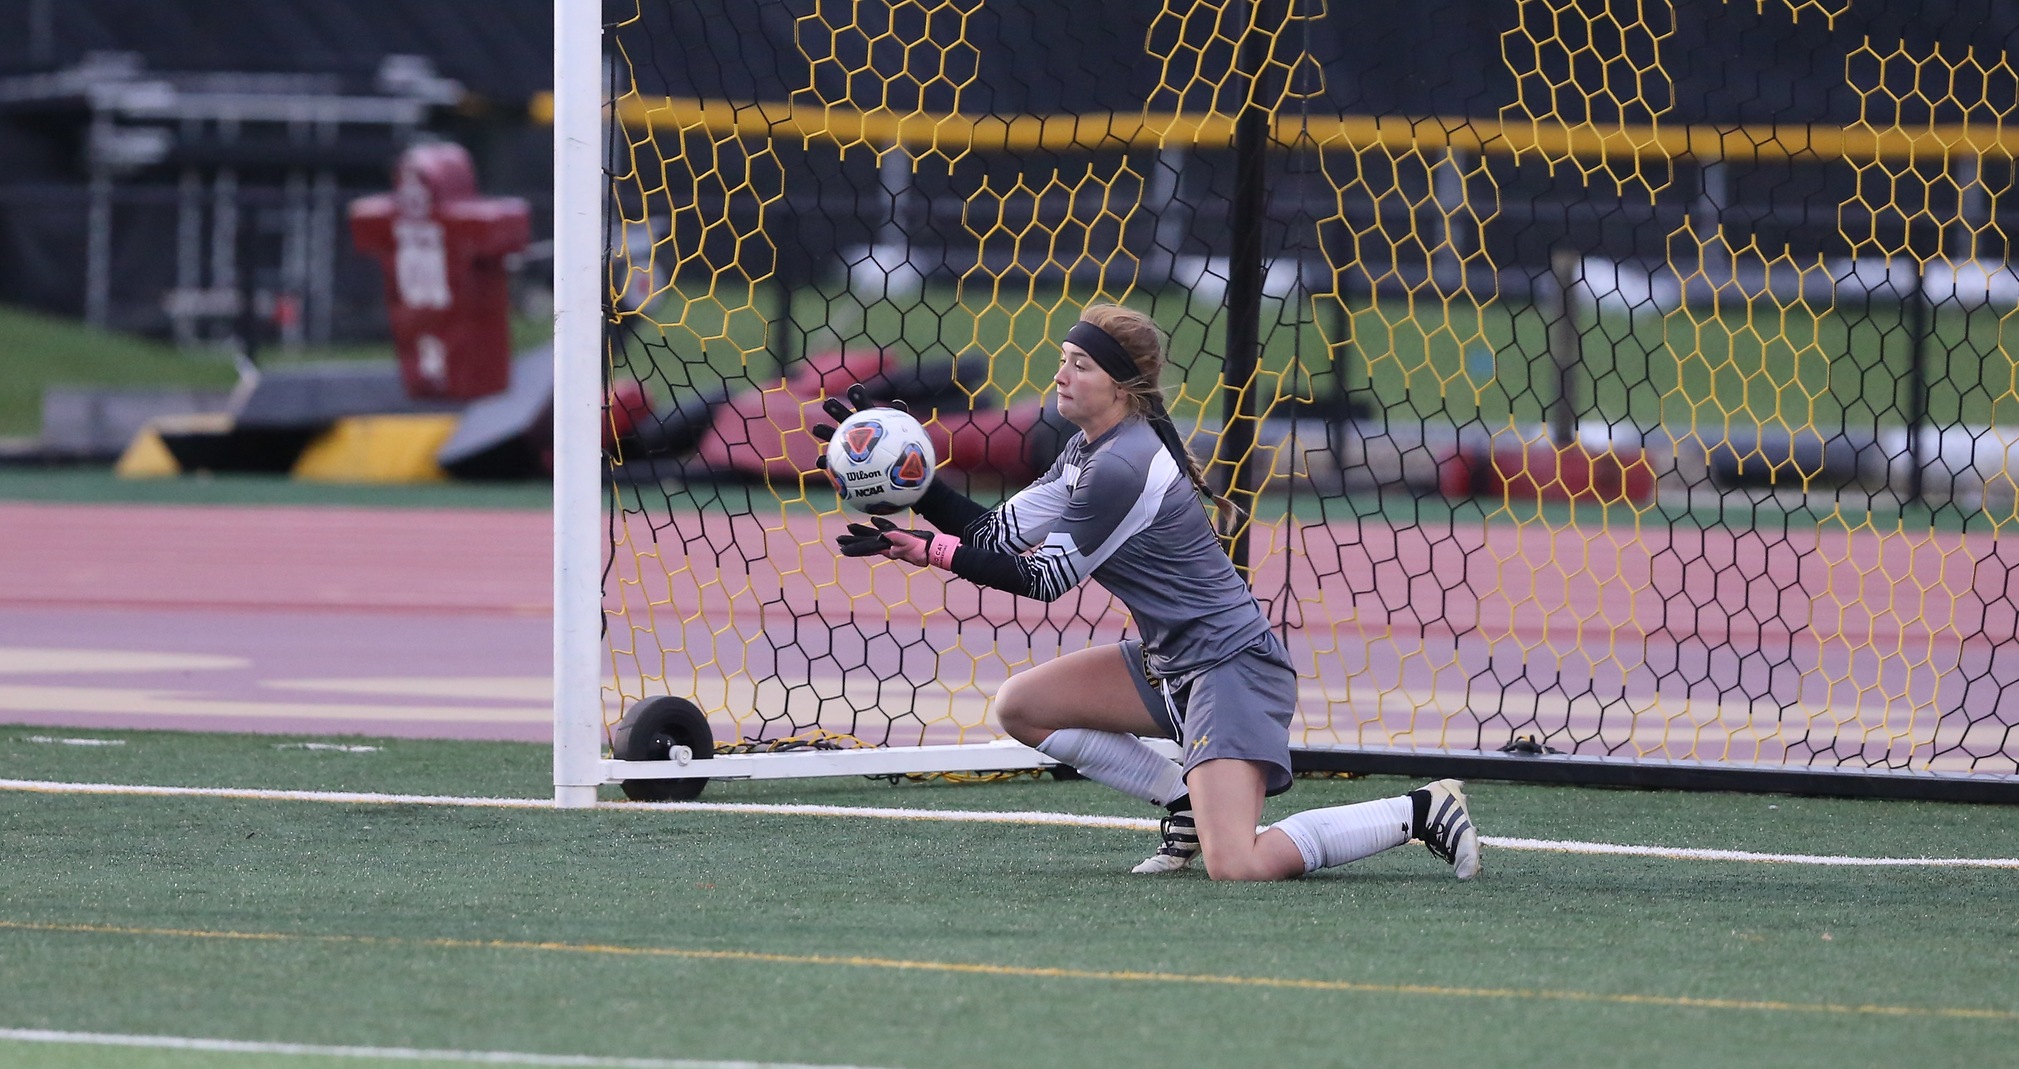 Erin Toomey recorded five saves against the Duhawks.